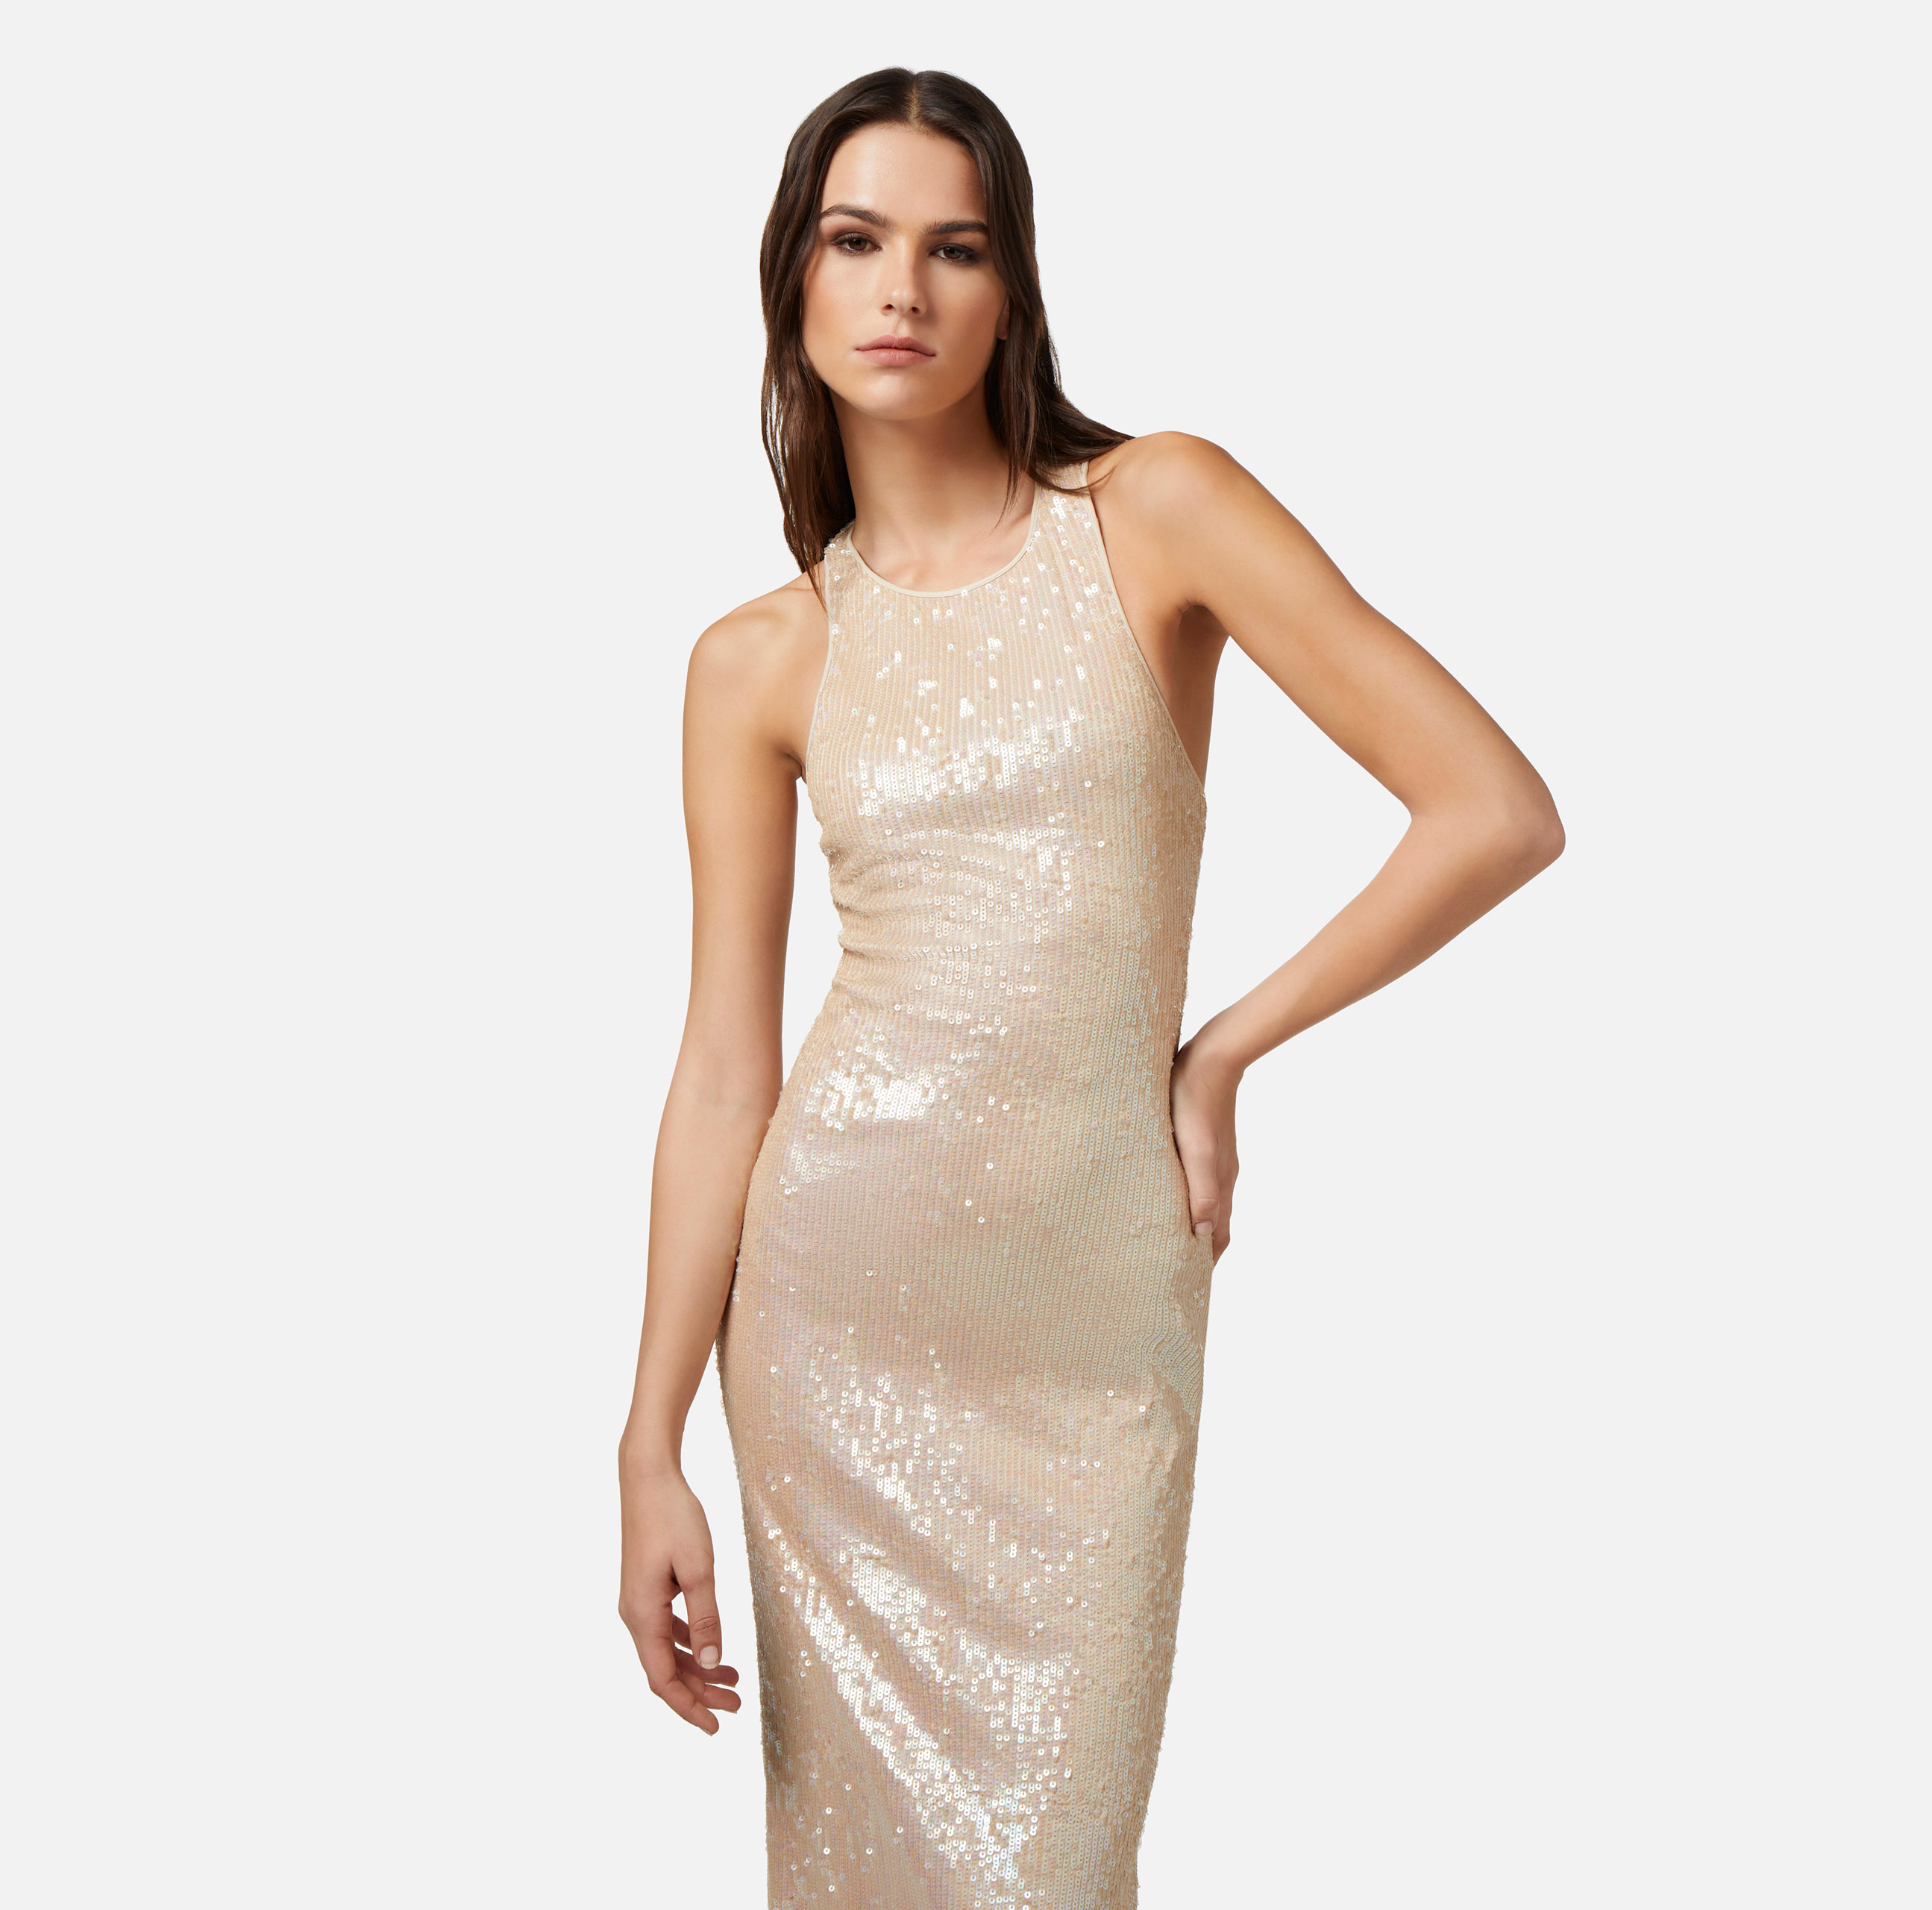 Red carpet dress in jersey with sequins - Elisabetta Franchi